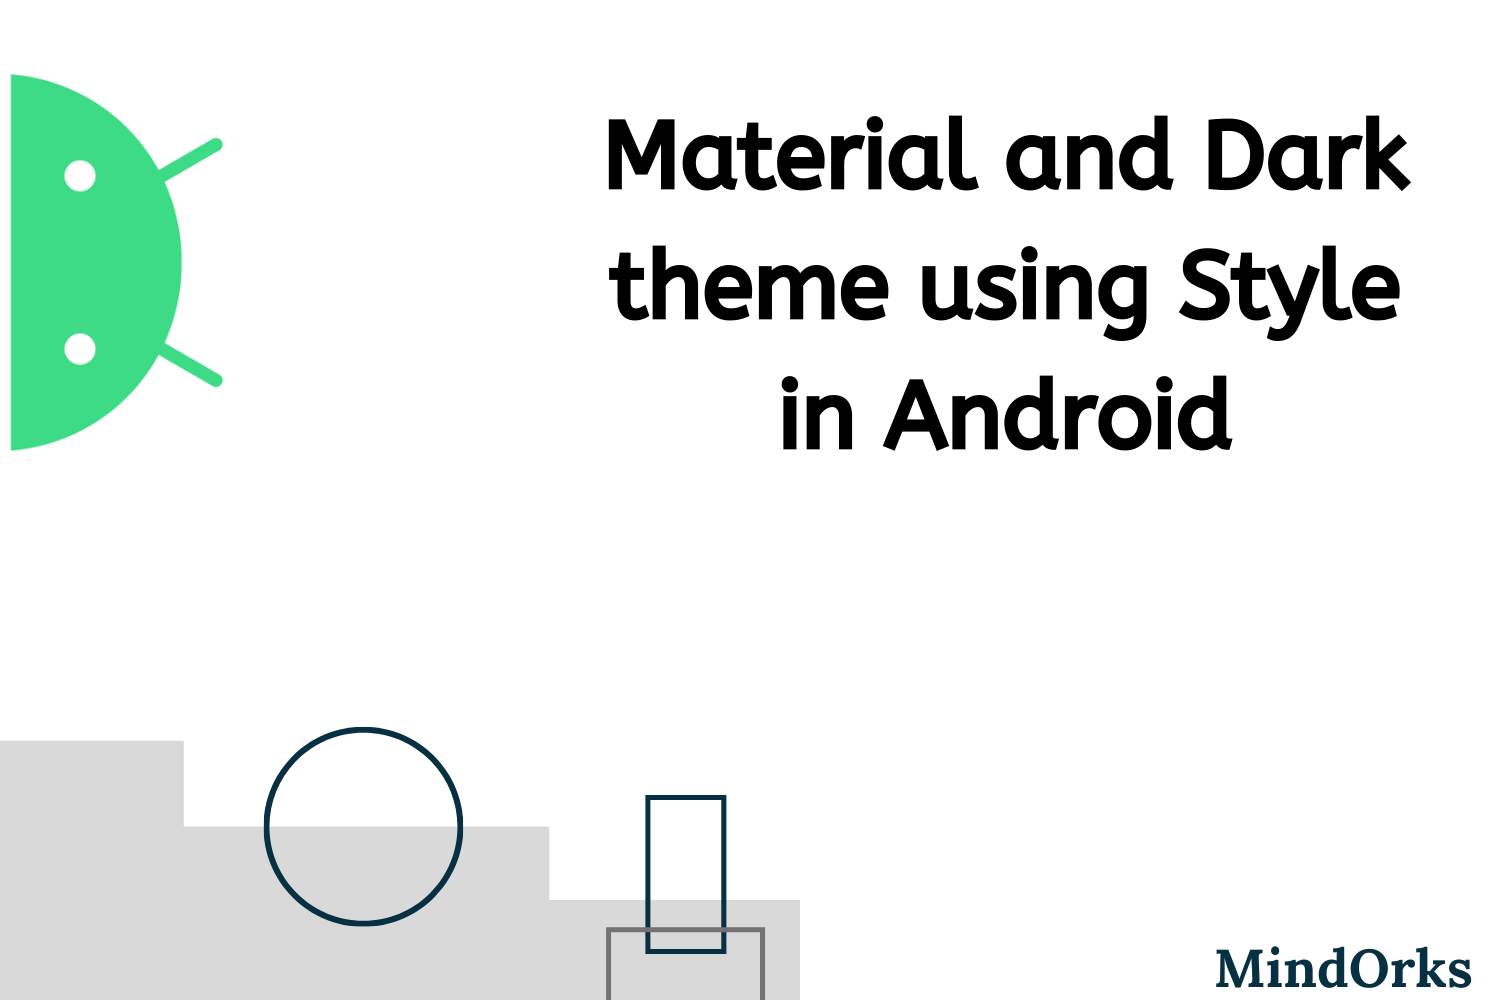 Build Material and Dark Themes Apps Using Style in Android